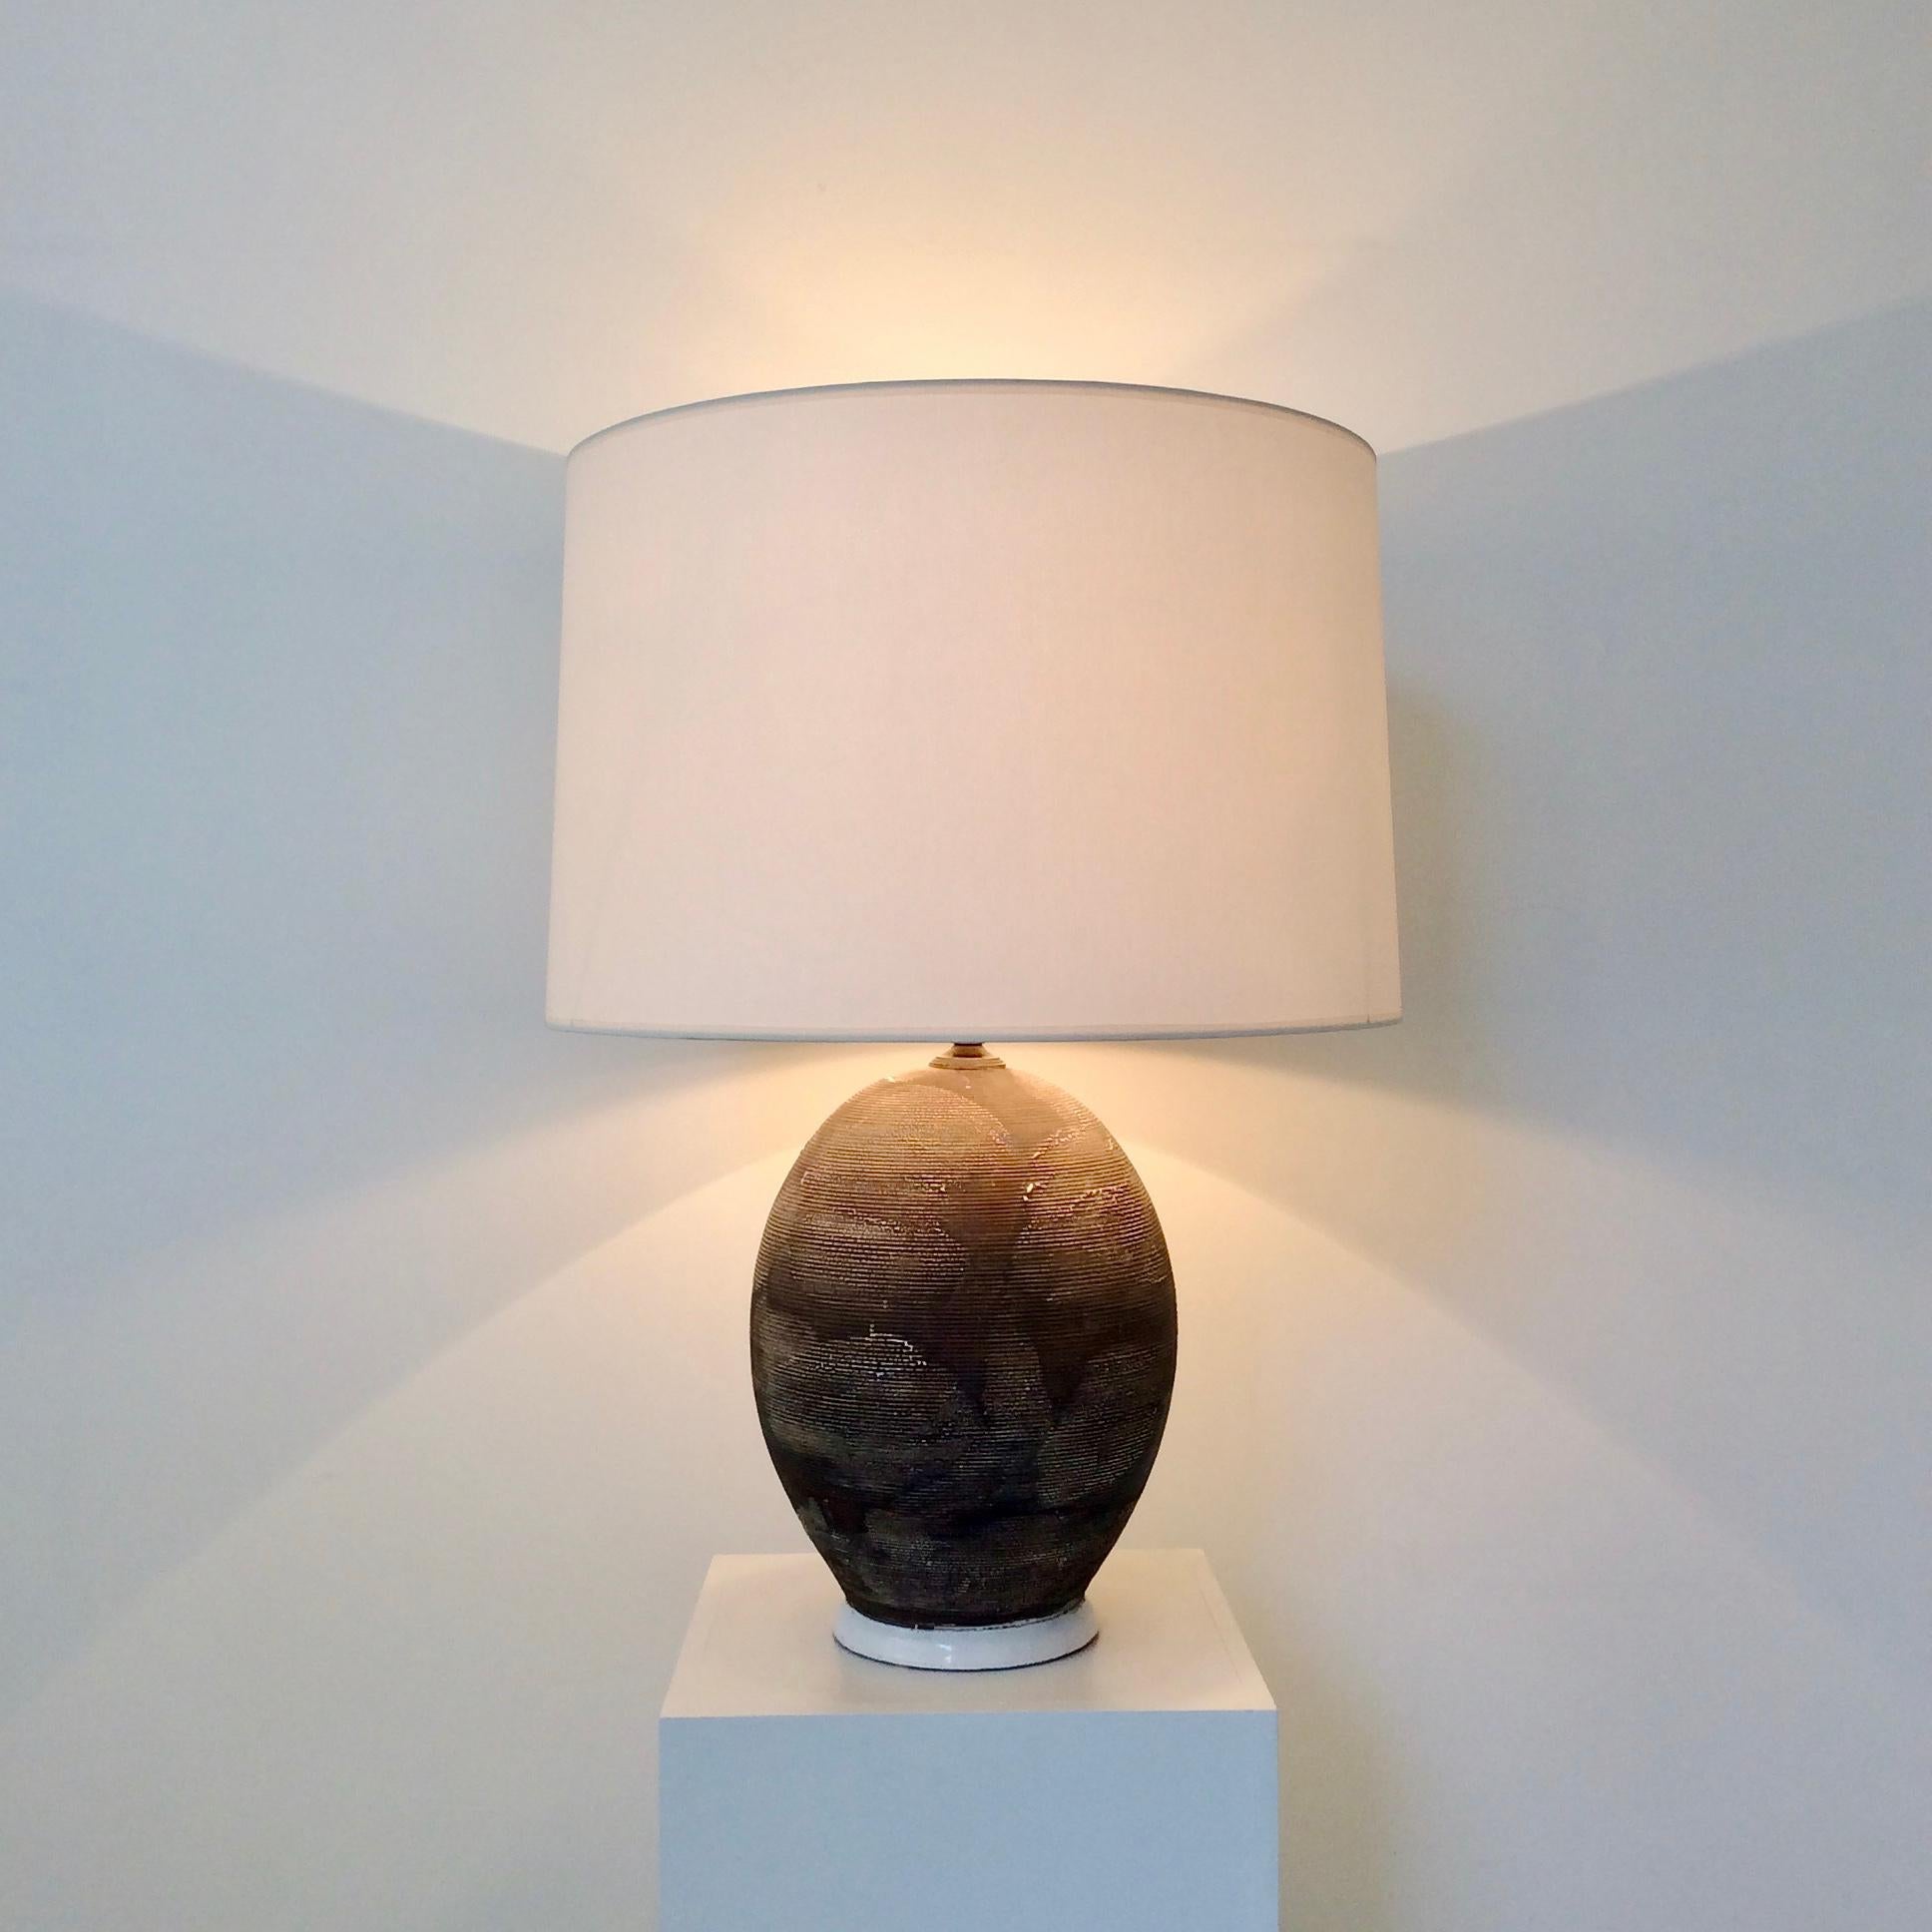 Ceramic table lamp, circa 1940, France.
Brown and white textured, enameled ceramic.
New white fabric shade.
3 B22 bulbs of 40 W.
Dimensions: 63 cm H, diameter of the base 15 cm , diameter of the shade 46 cm.
Good condition.
  